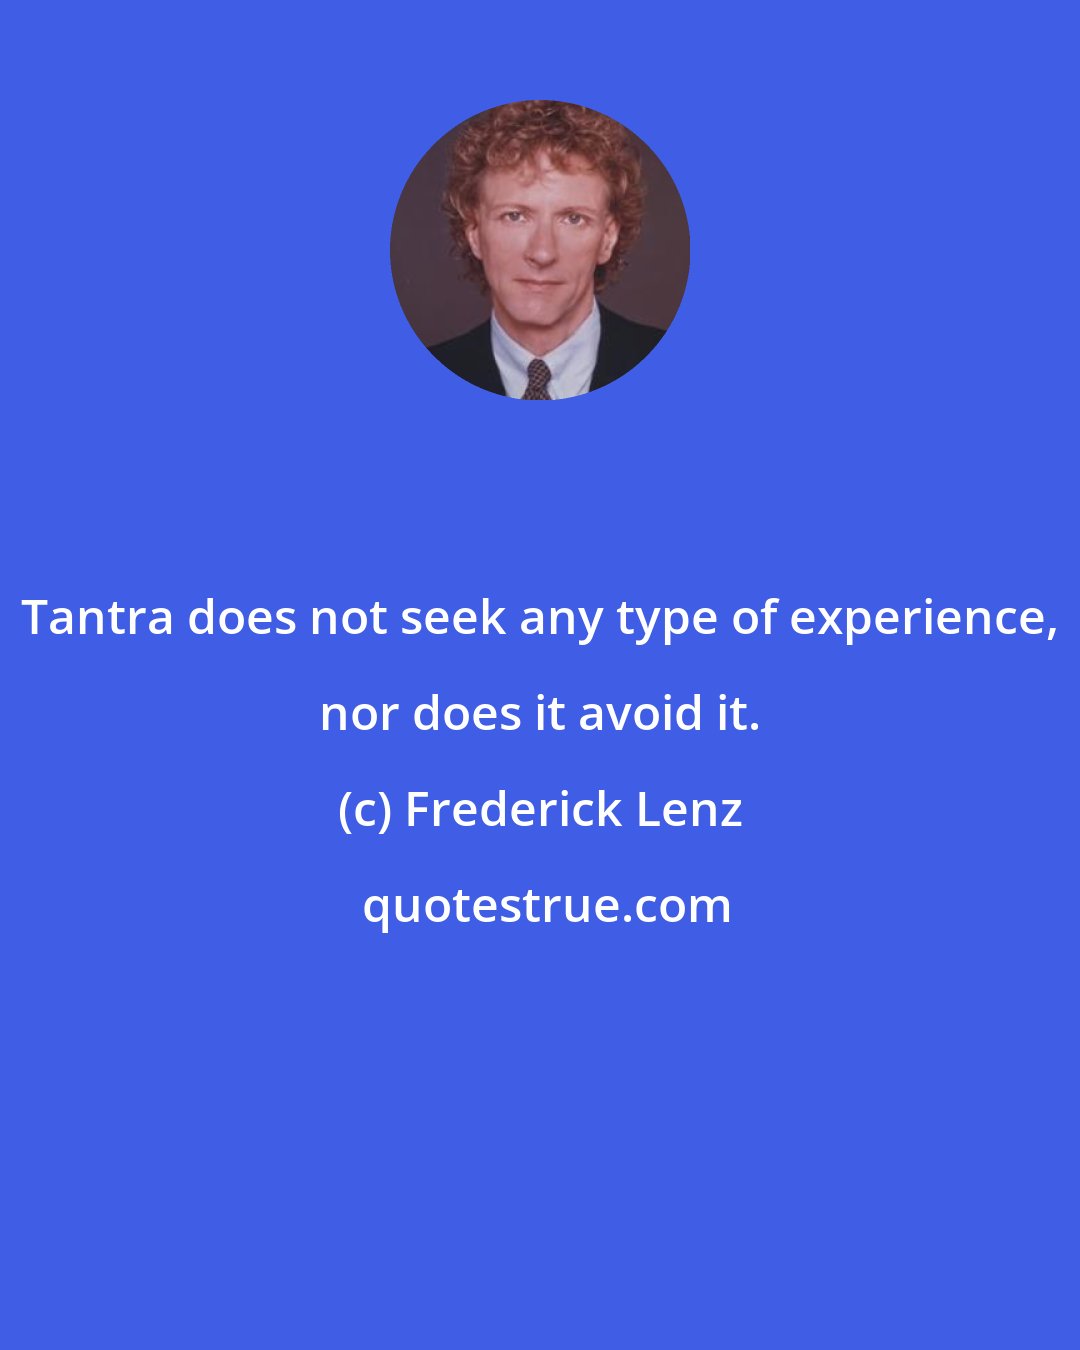 Frederick Lenz: Tantra does not seek any type of experience, nor does it avoid it.